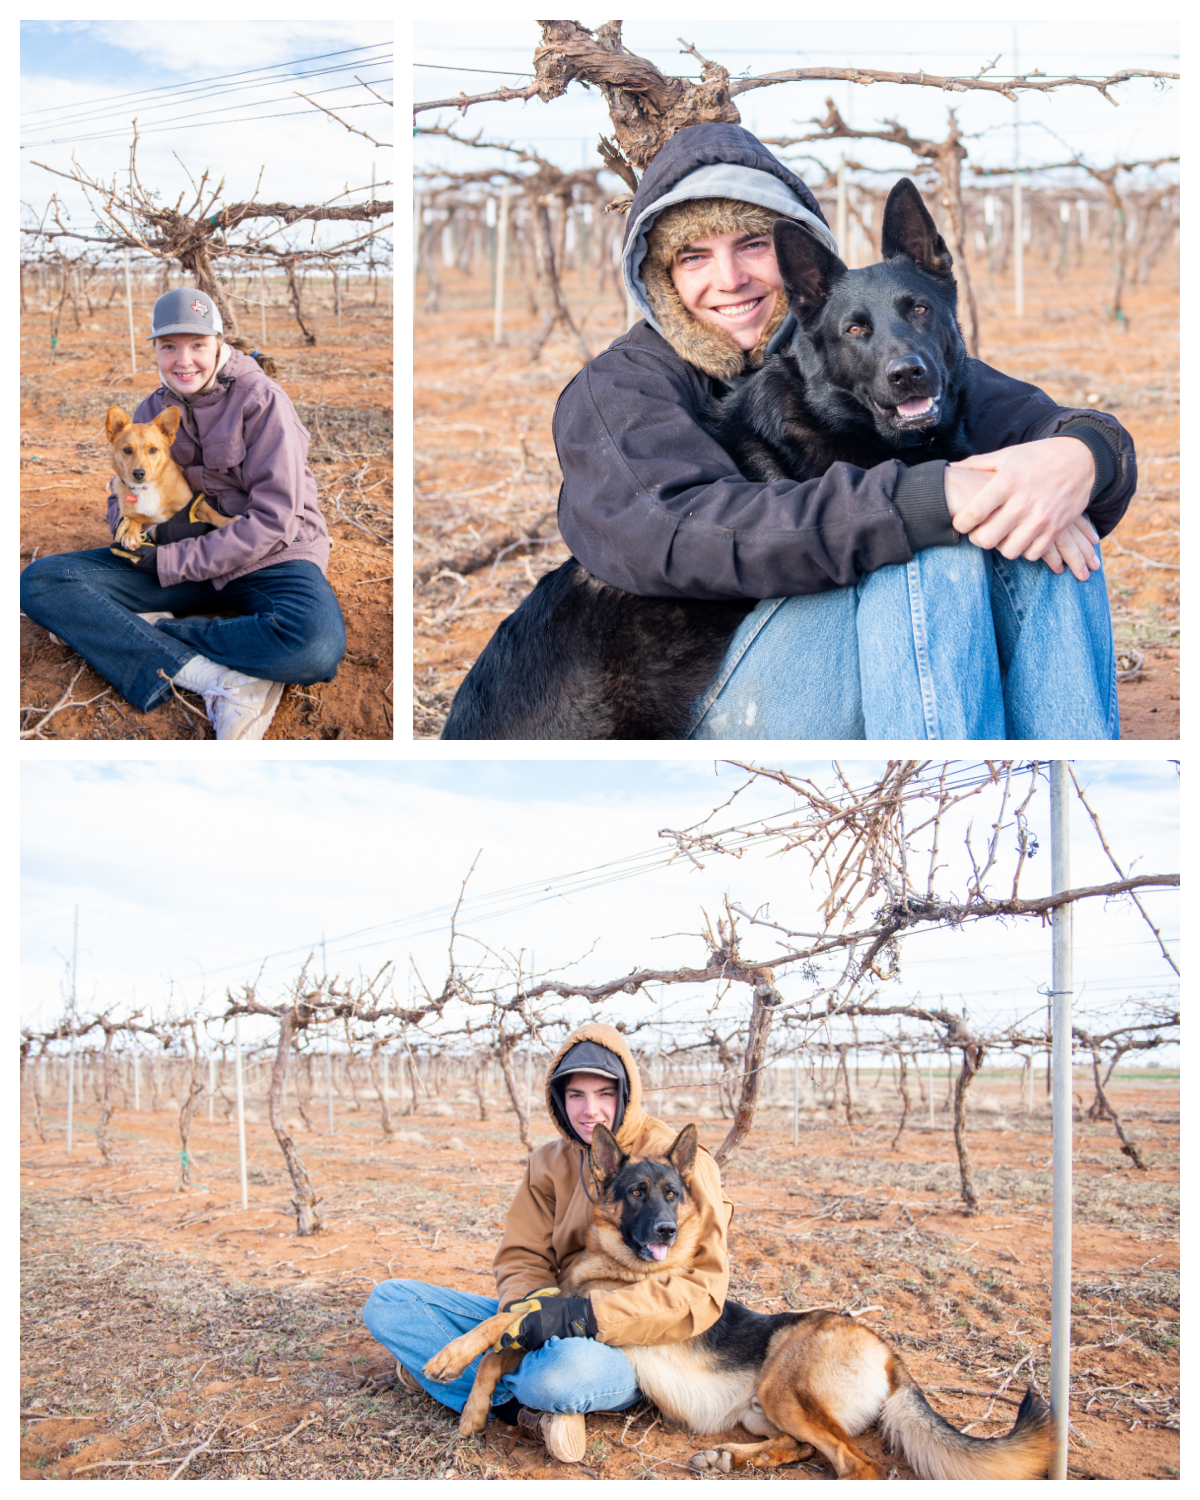 Collage photo - Vineyard workers and their dogs.